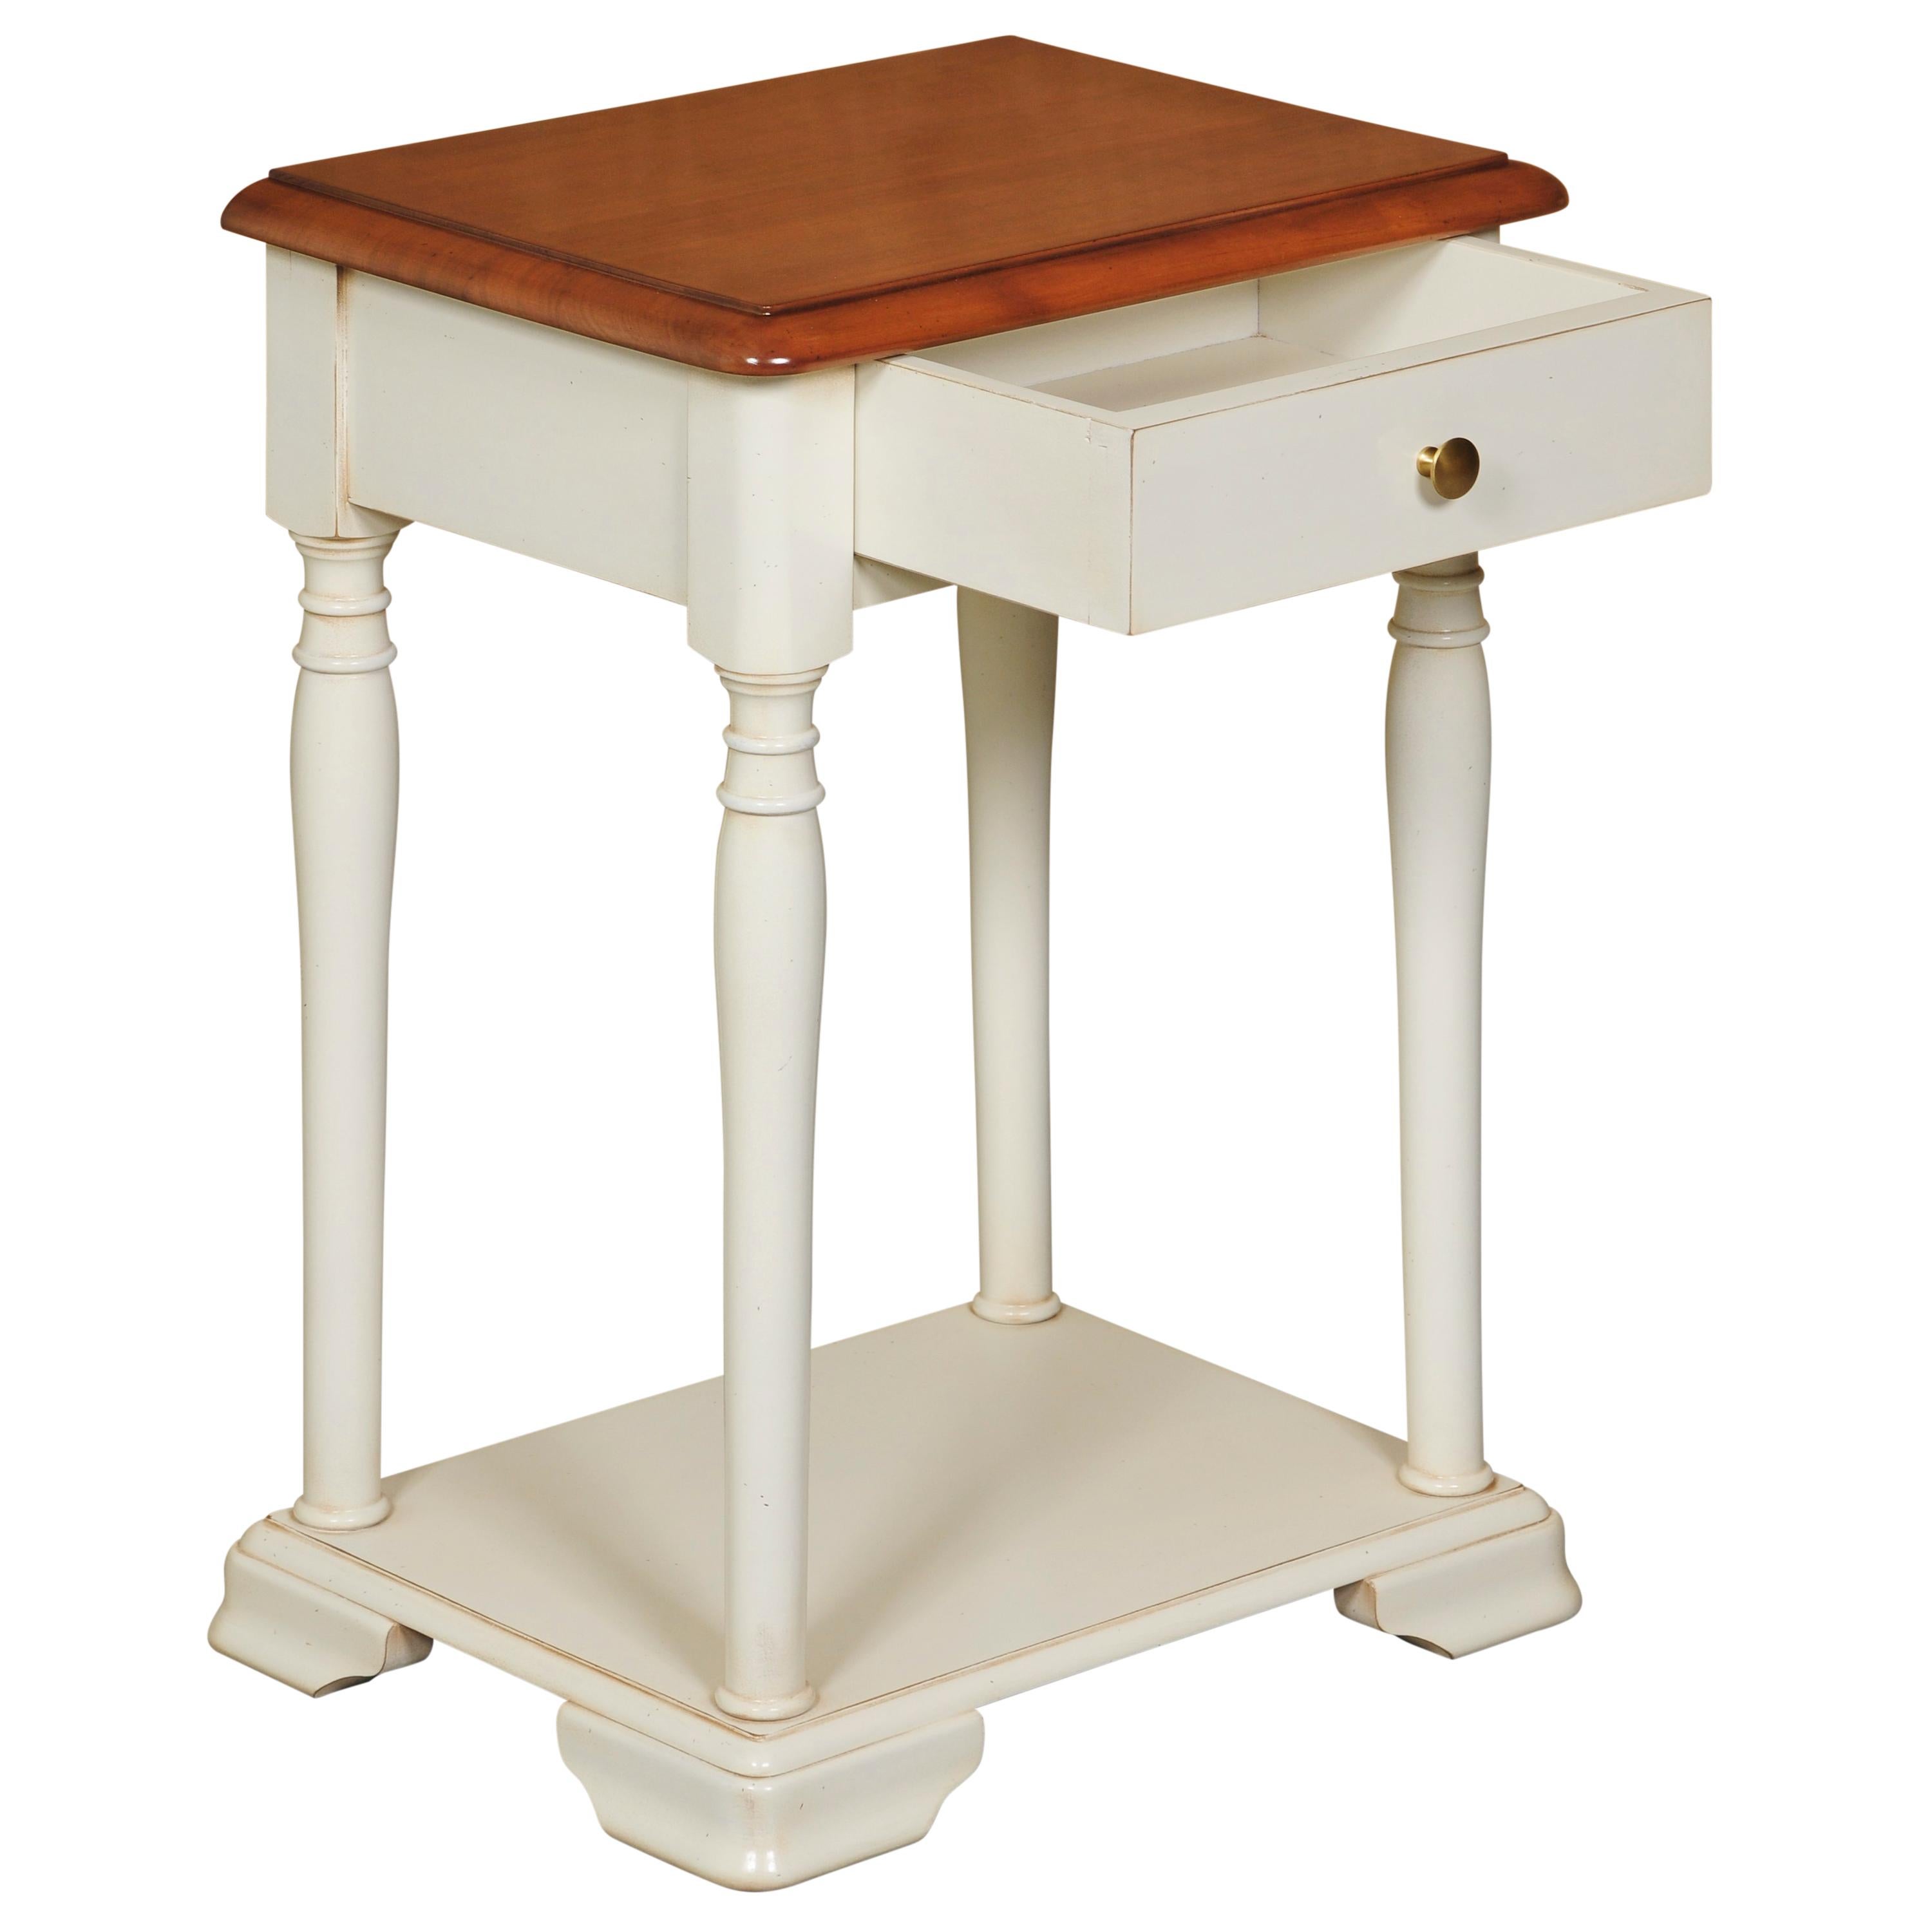 This bedside table is a handmade reproduction of the French Louis Philippe Style in the mid 19th century in France characterized by its curved moldings, hand-curved feet and rounded shapes and design.

1 drawer is integrated n the front with an